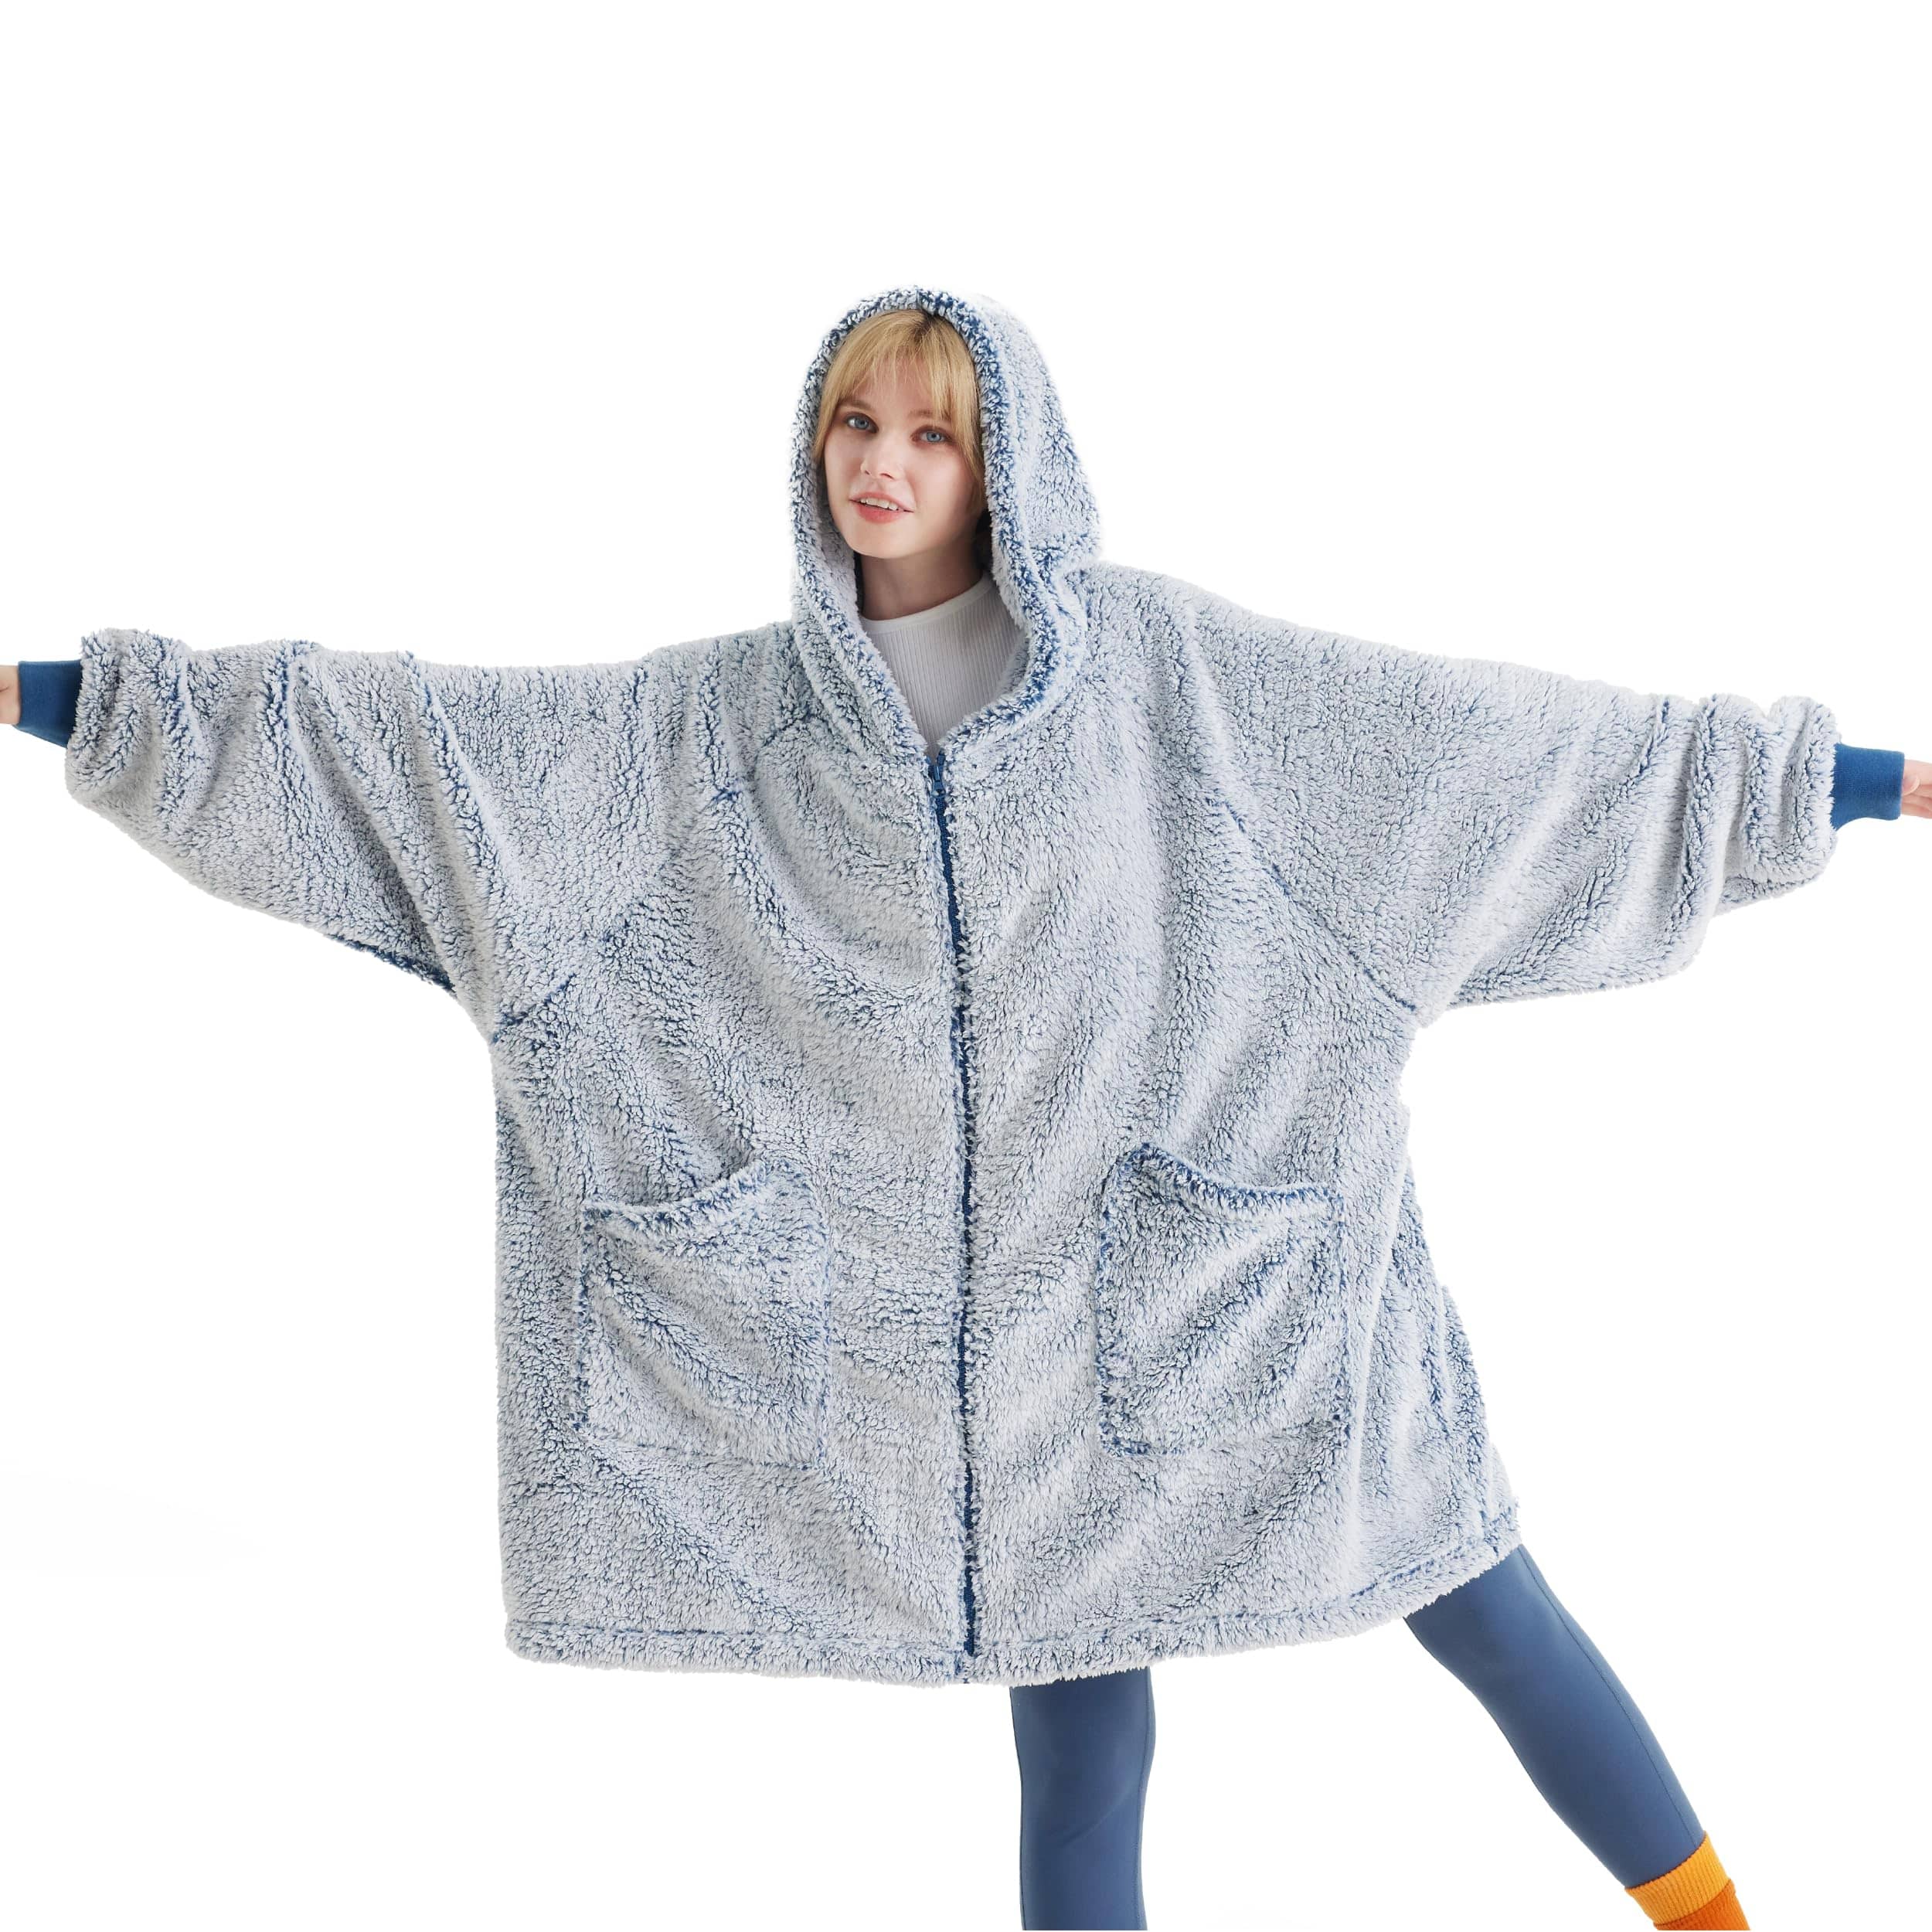 The Comfy Dream Adult Oversized Microfiber Wearable Blanket